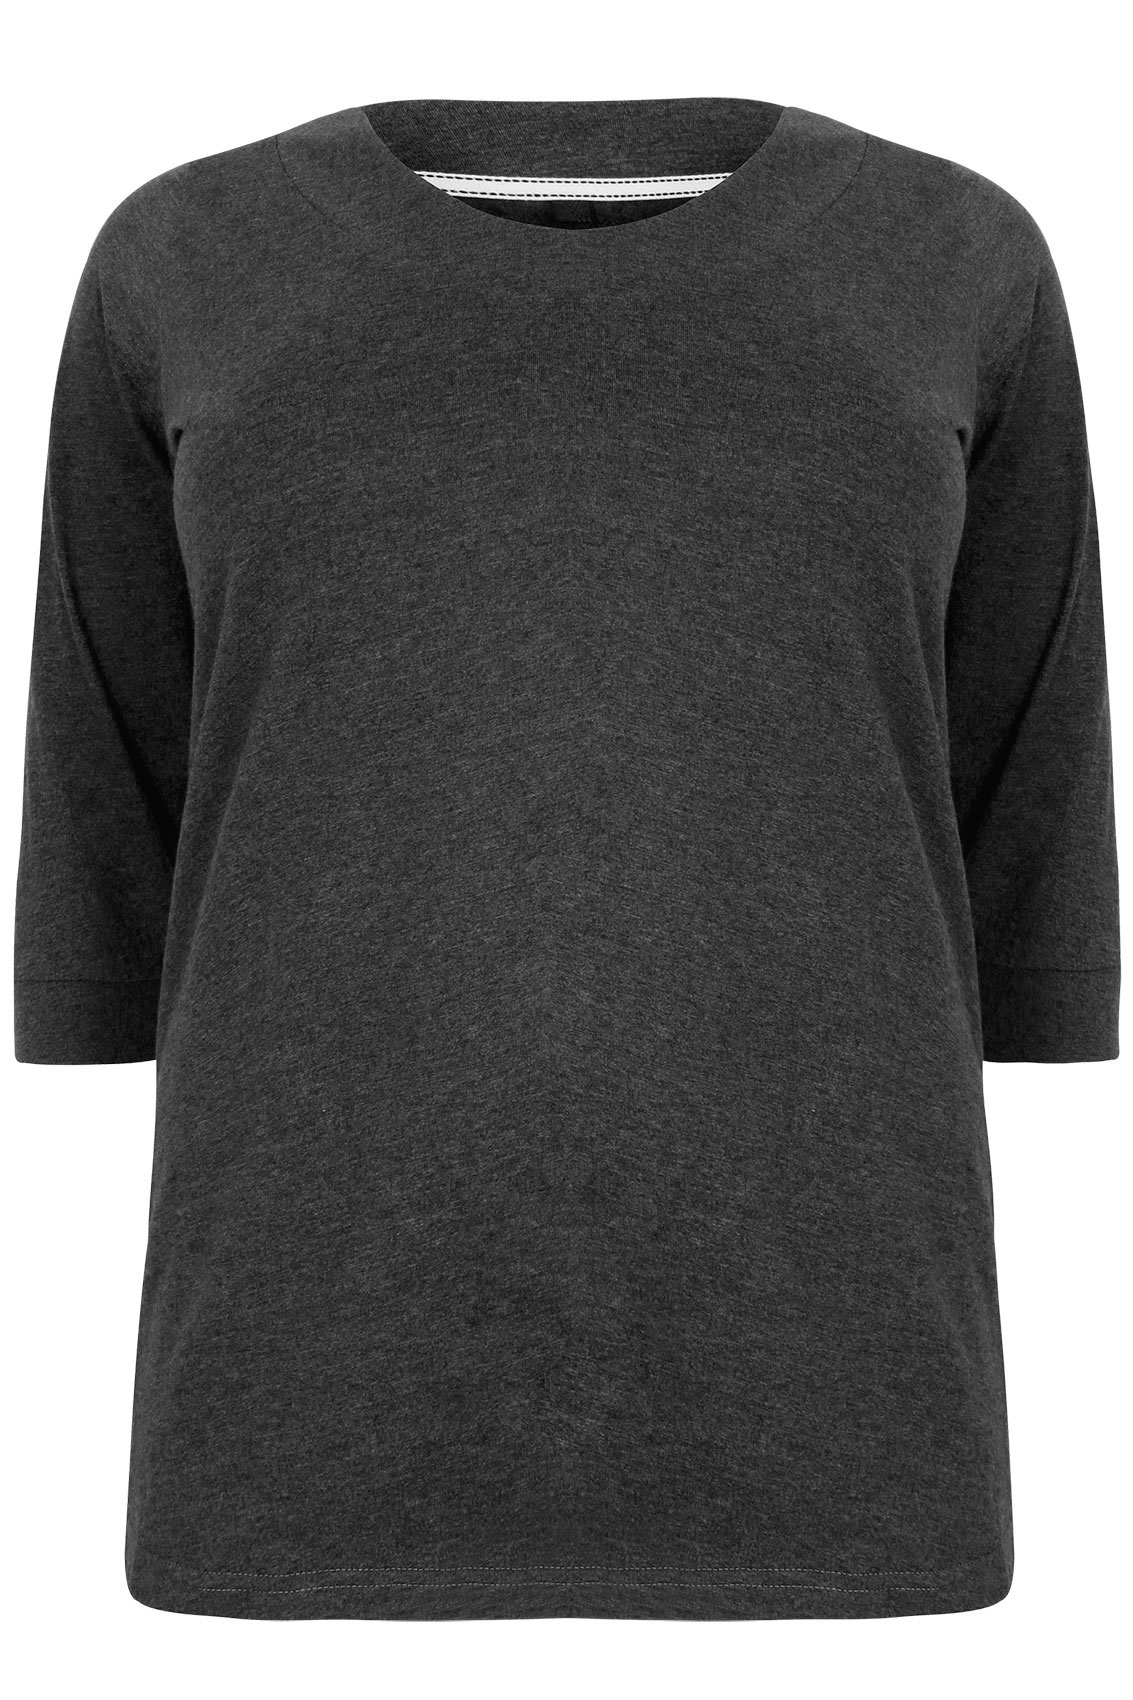 Dark Grey Band Scoop Neckline T-Shirt With 3/4 Sleeves plus Size 16 to 32